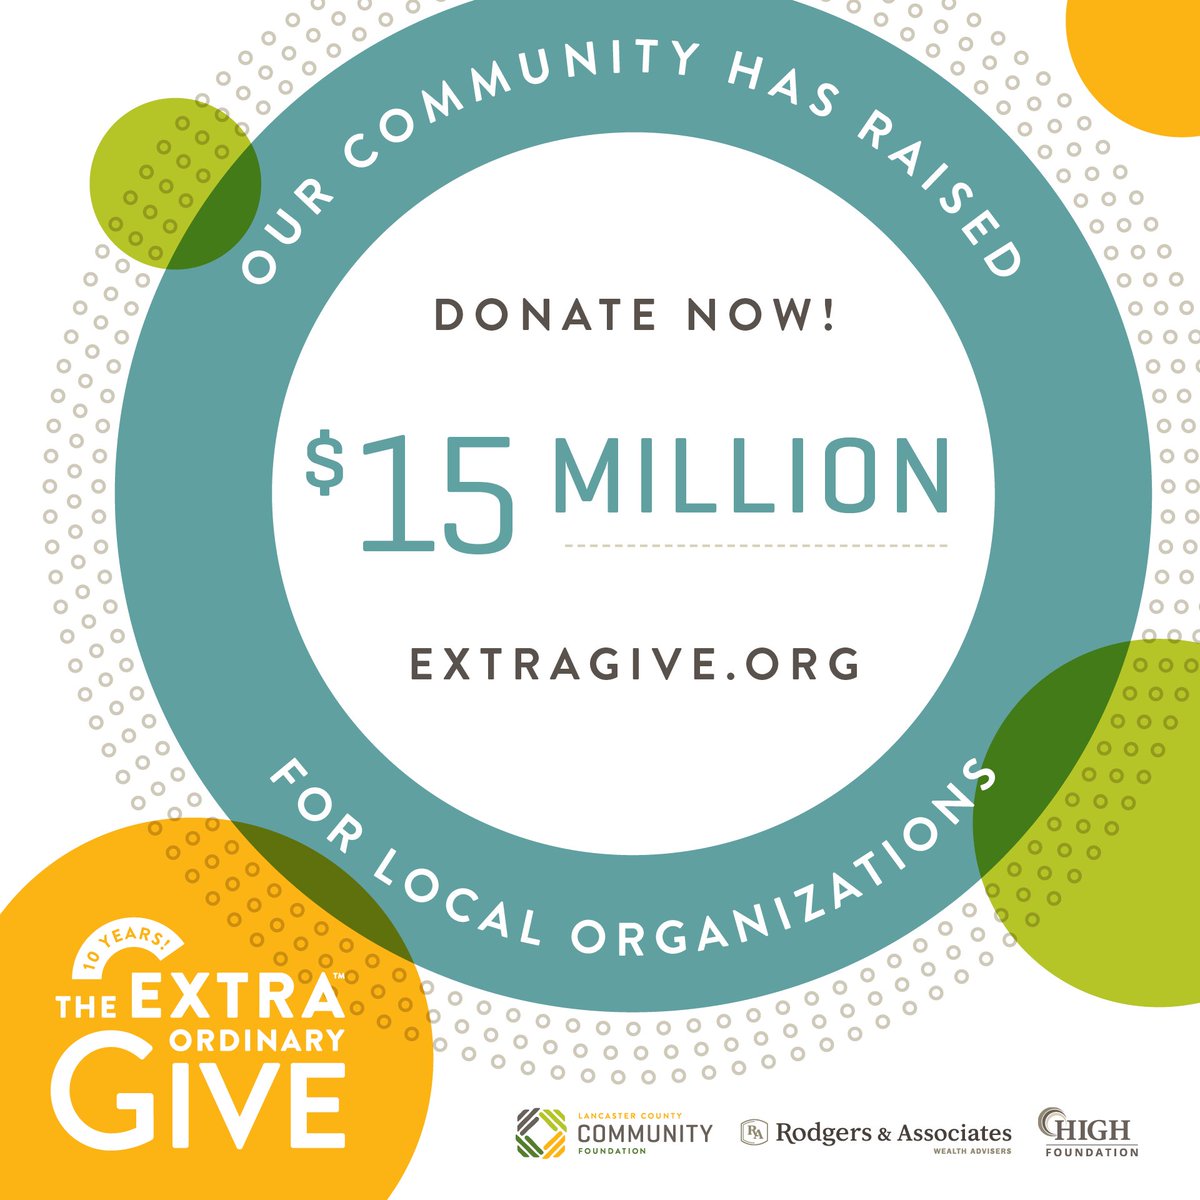 We've reached $15 million with less than twenty minutes left!! Lancaster, you continue to show us how EXTRAordinary you are! #GiveExtra